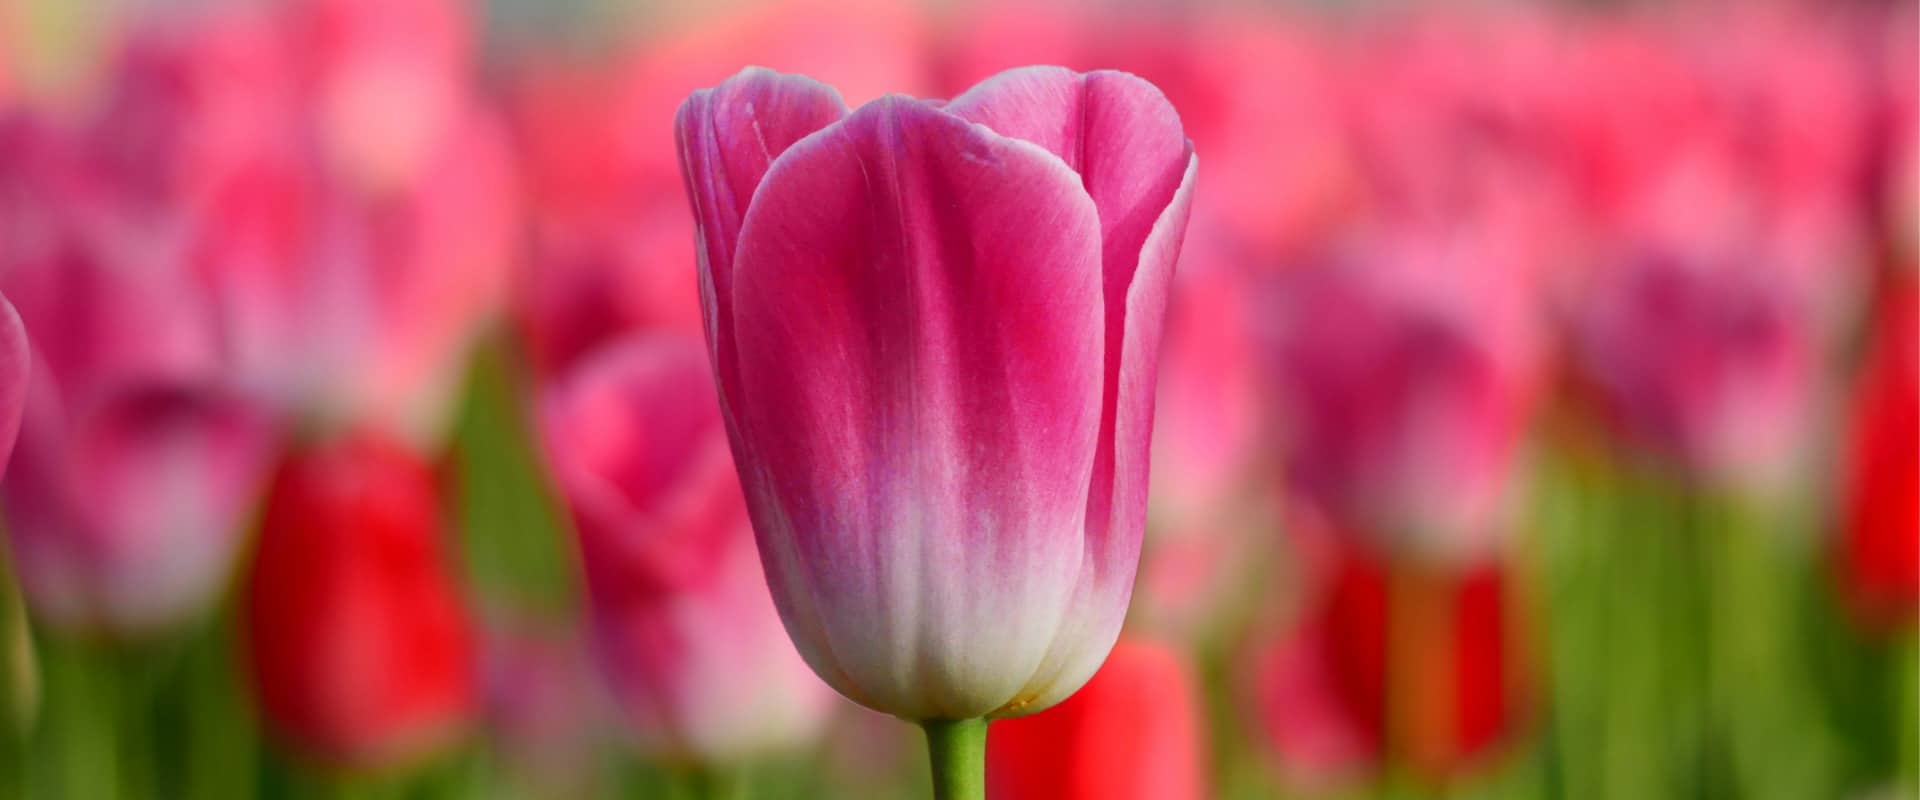 What is a tulip? Tours Holland will explain you